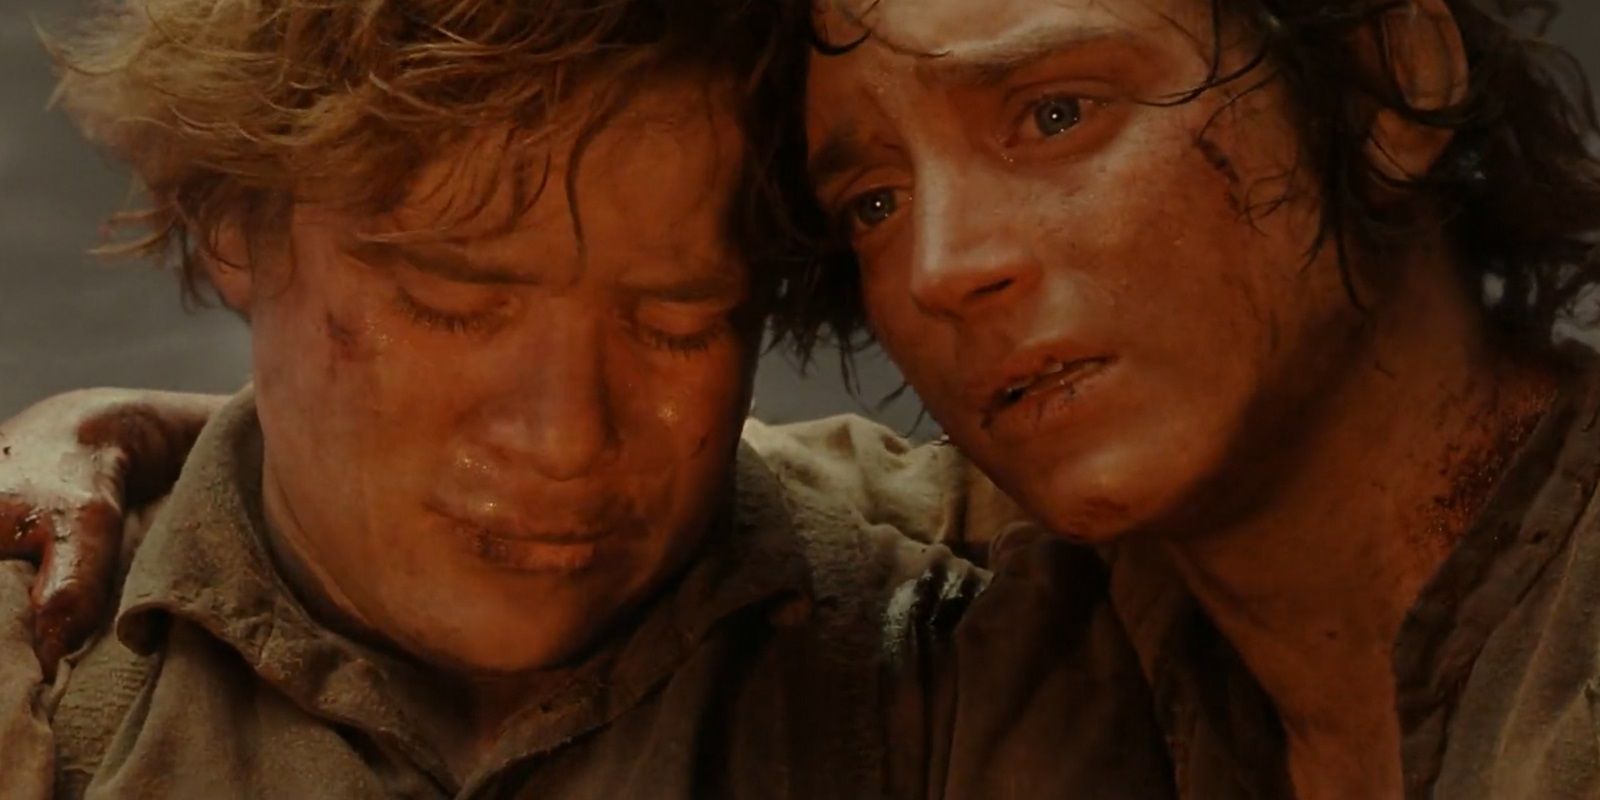 The Lord of the Rings The 10 Saddest Things About Samwise Gamgee